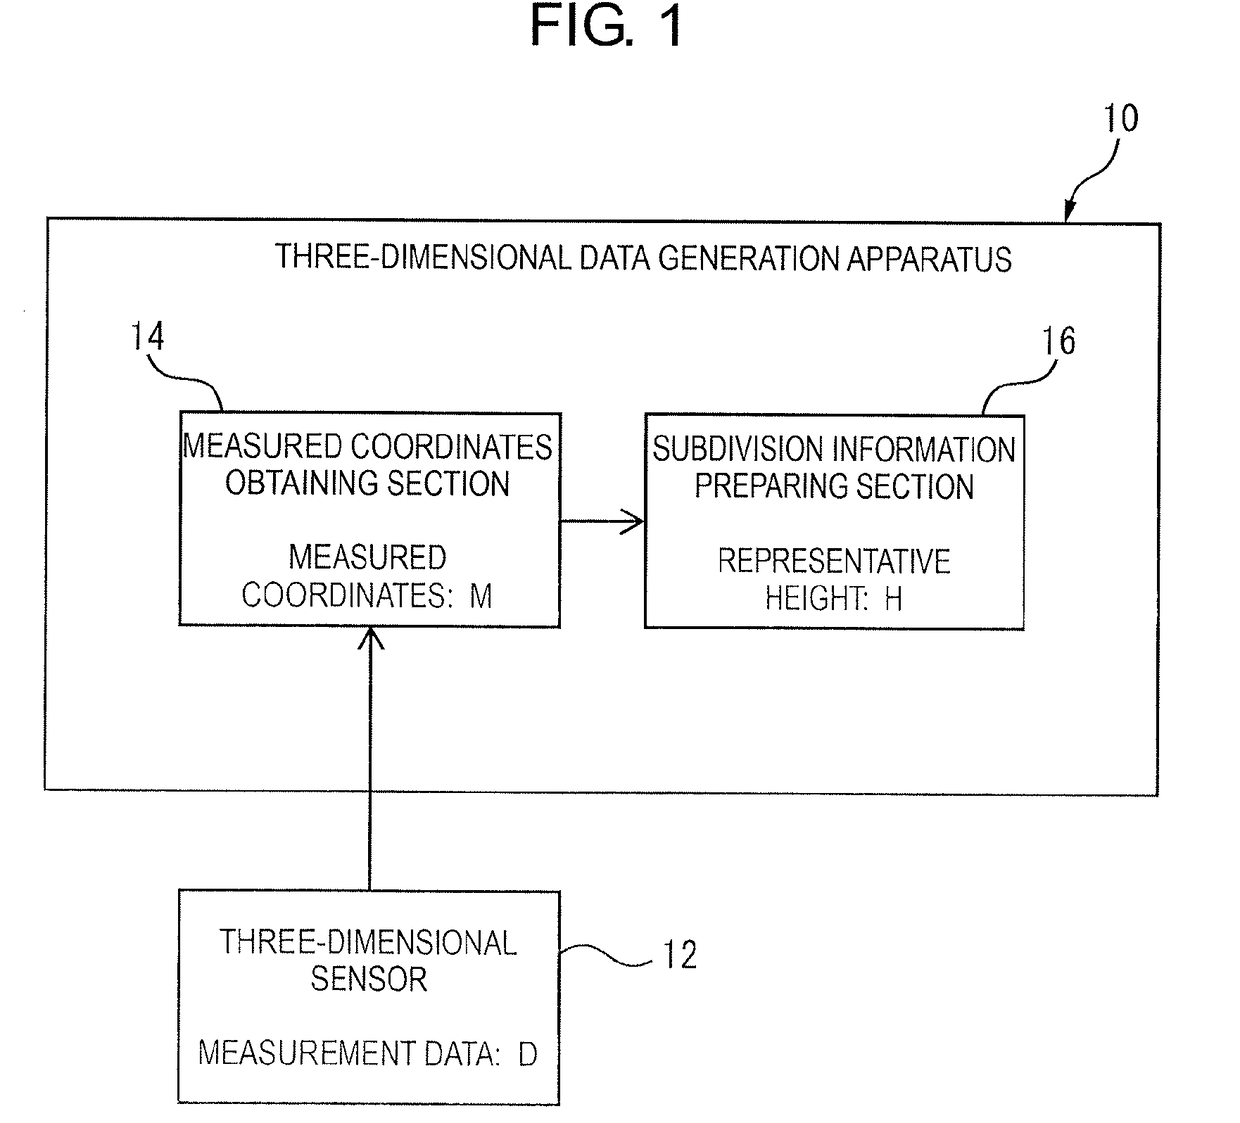 Apparatus and method of generating three-dimensional data, and monitoring system including three-dimensional data generation apparatus